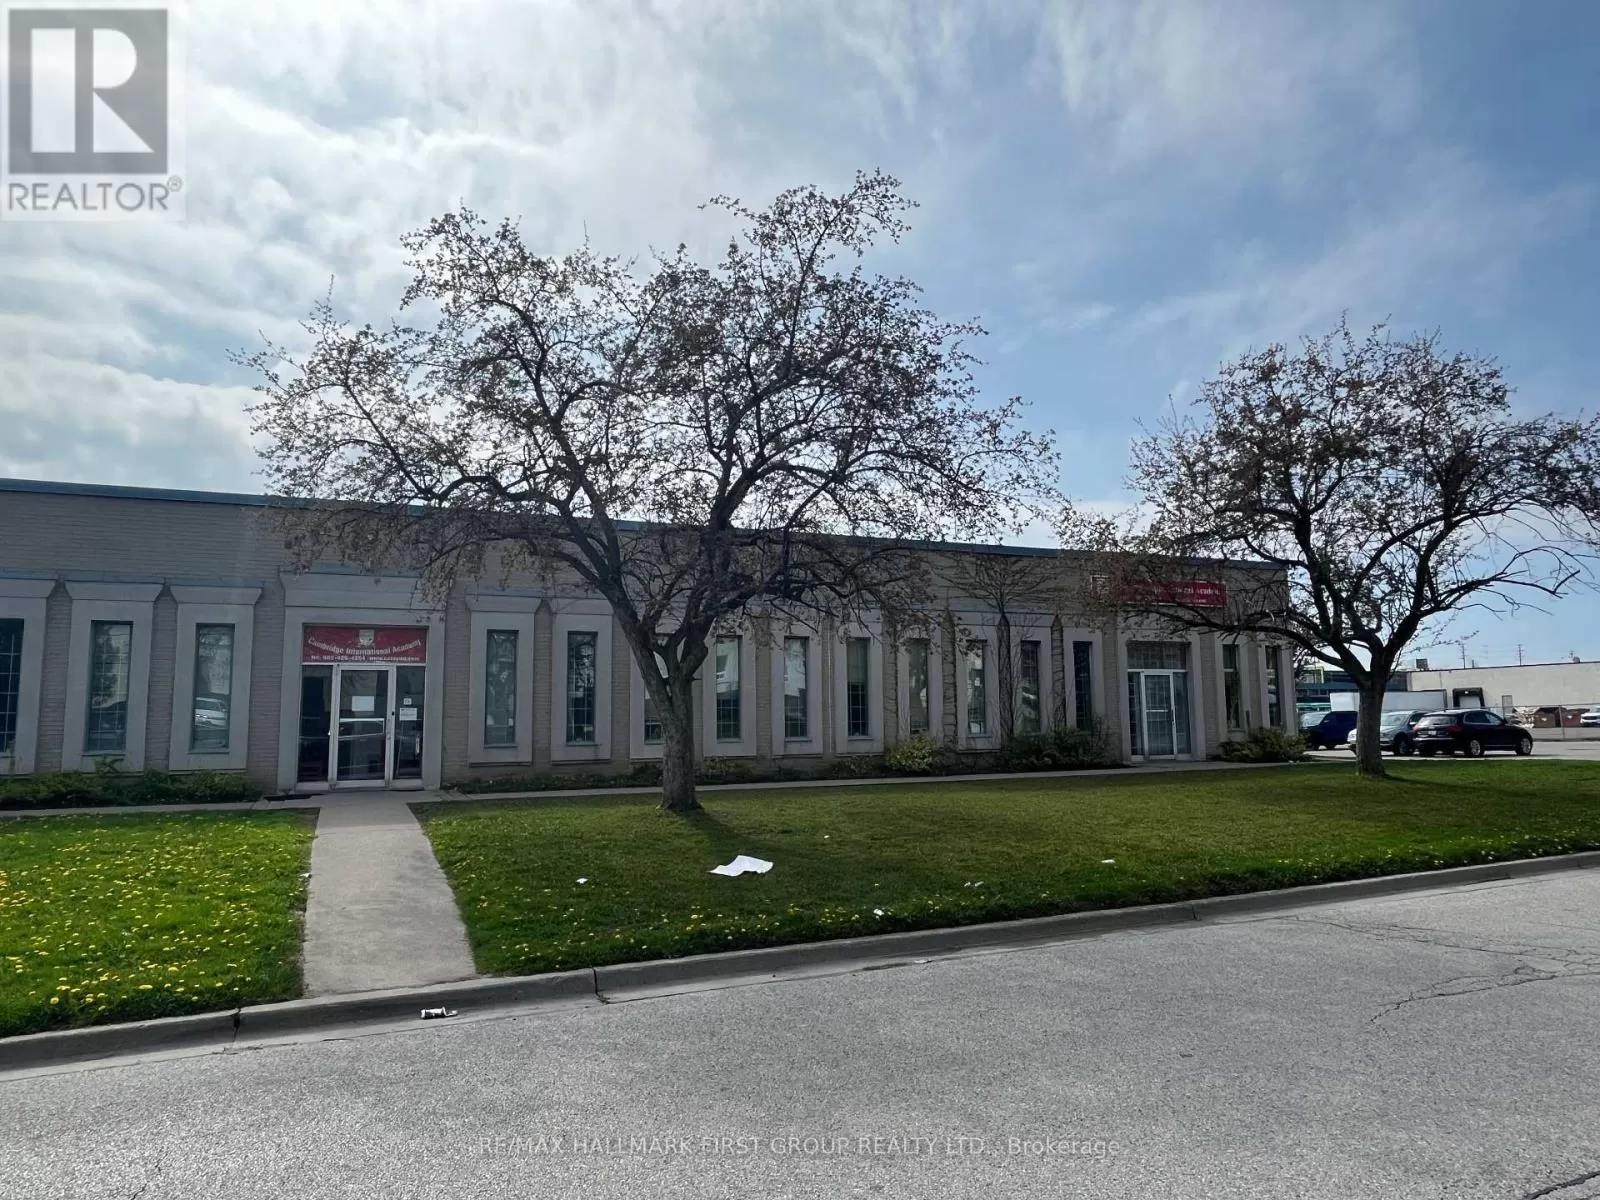 Offices for rent: 1,2,3&5 - 126 Commercial Avenue, Ajax, Ontario L1S 2H5